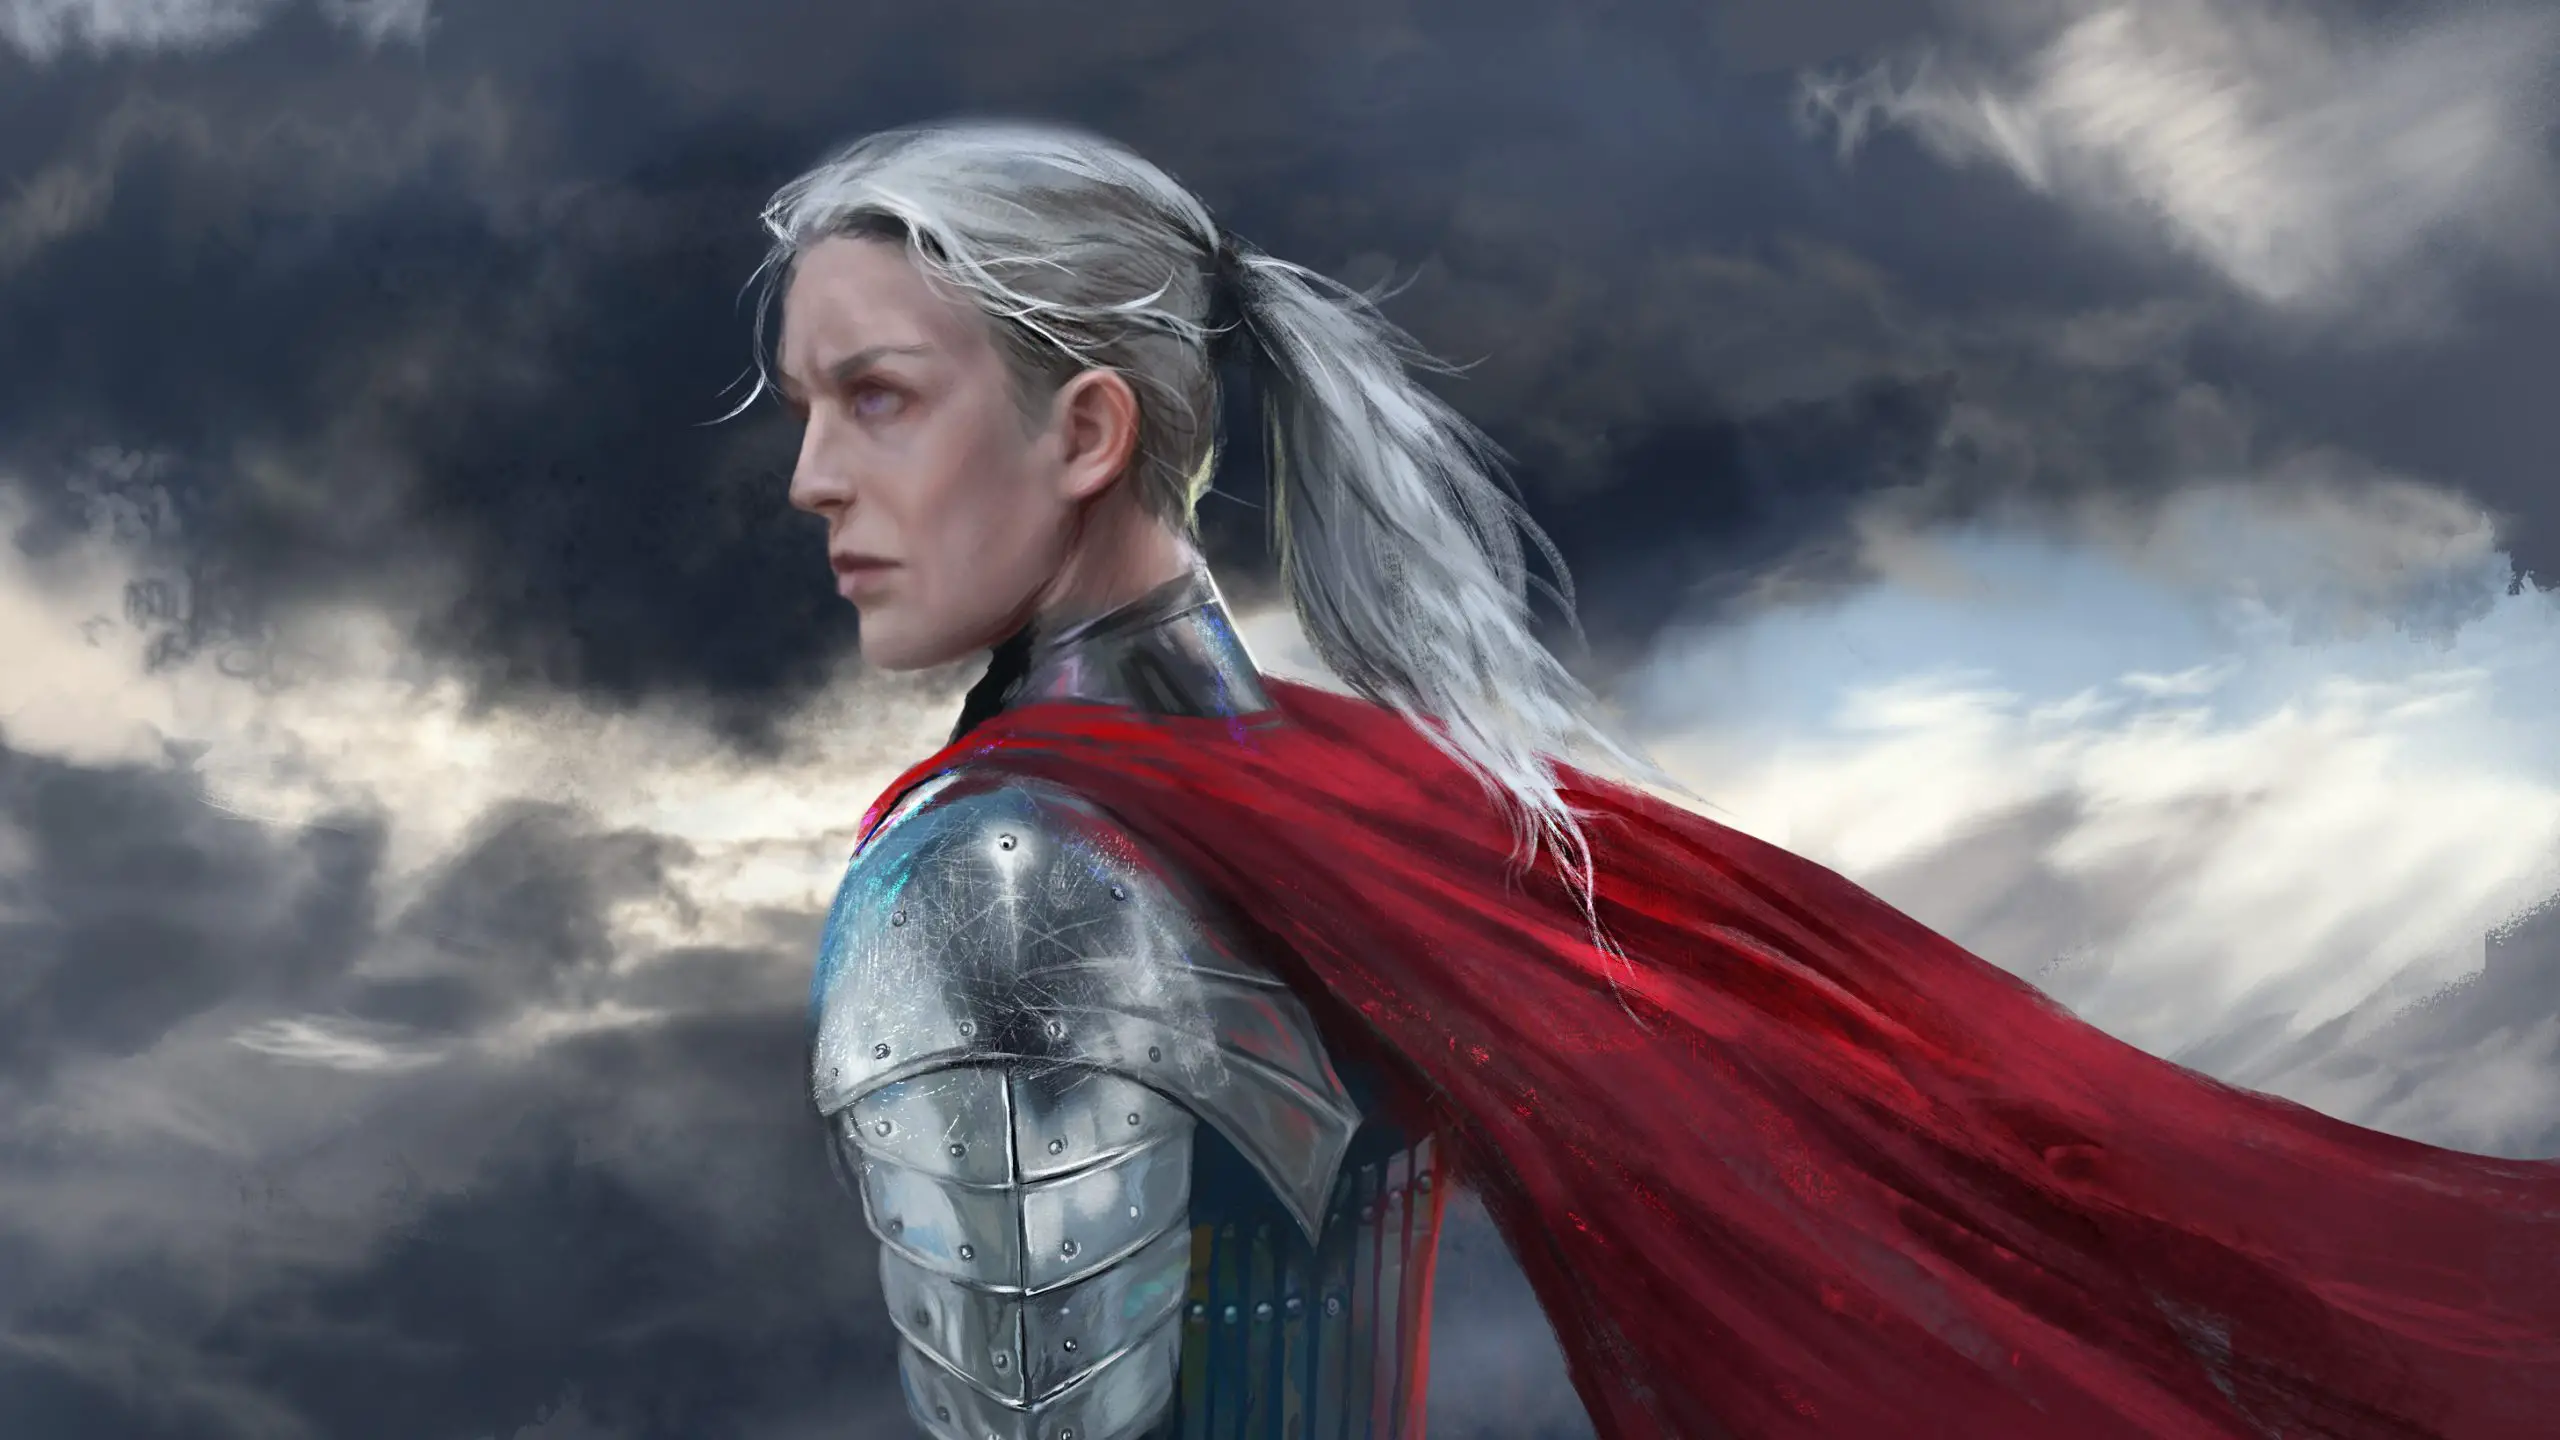 Rhaenys Targaryen in A Song of Ice and Fire